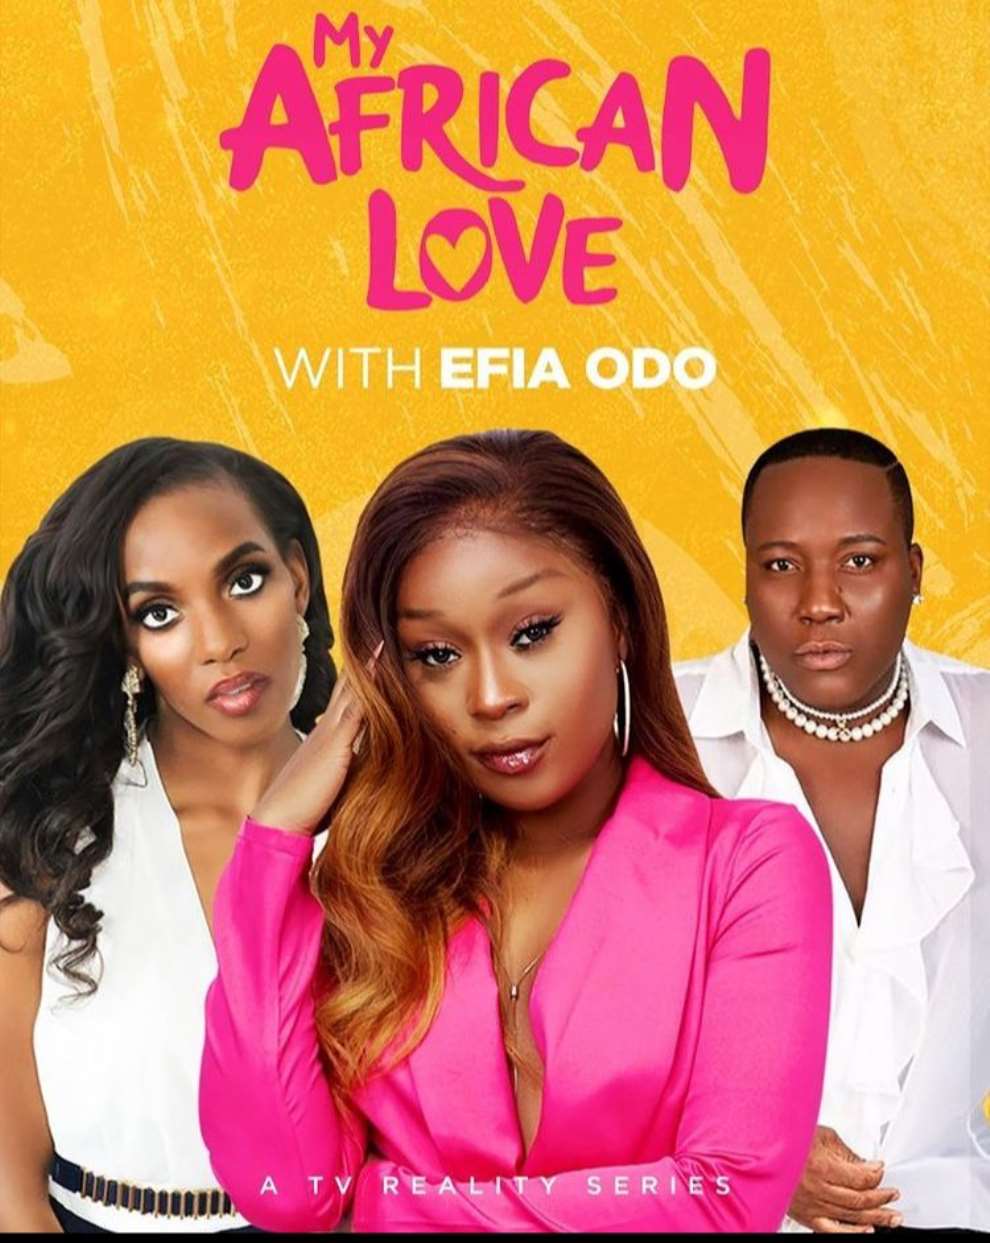 Efia Odo stars in unique reality TV series ‘My African Love’ set in US